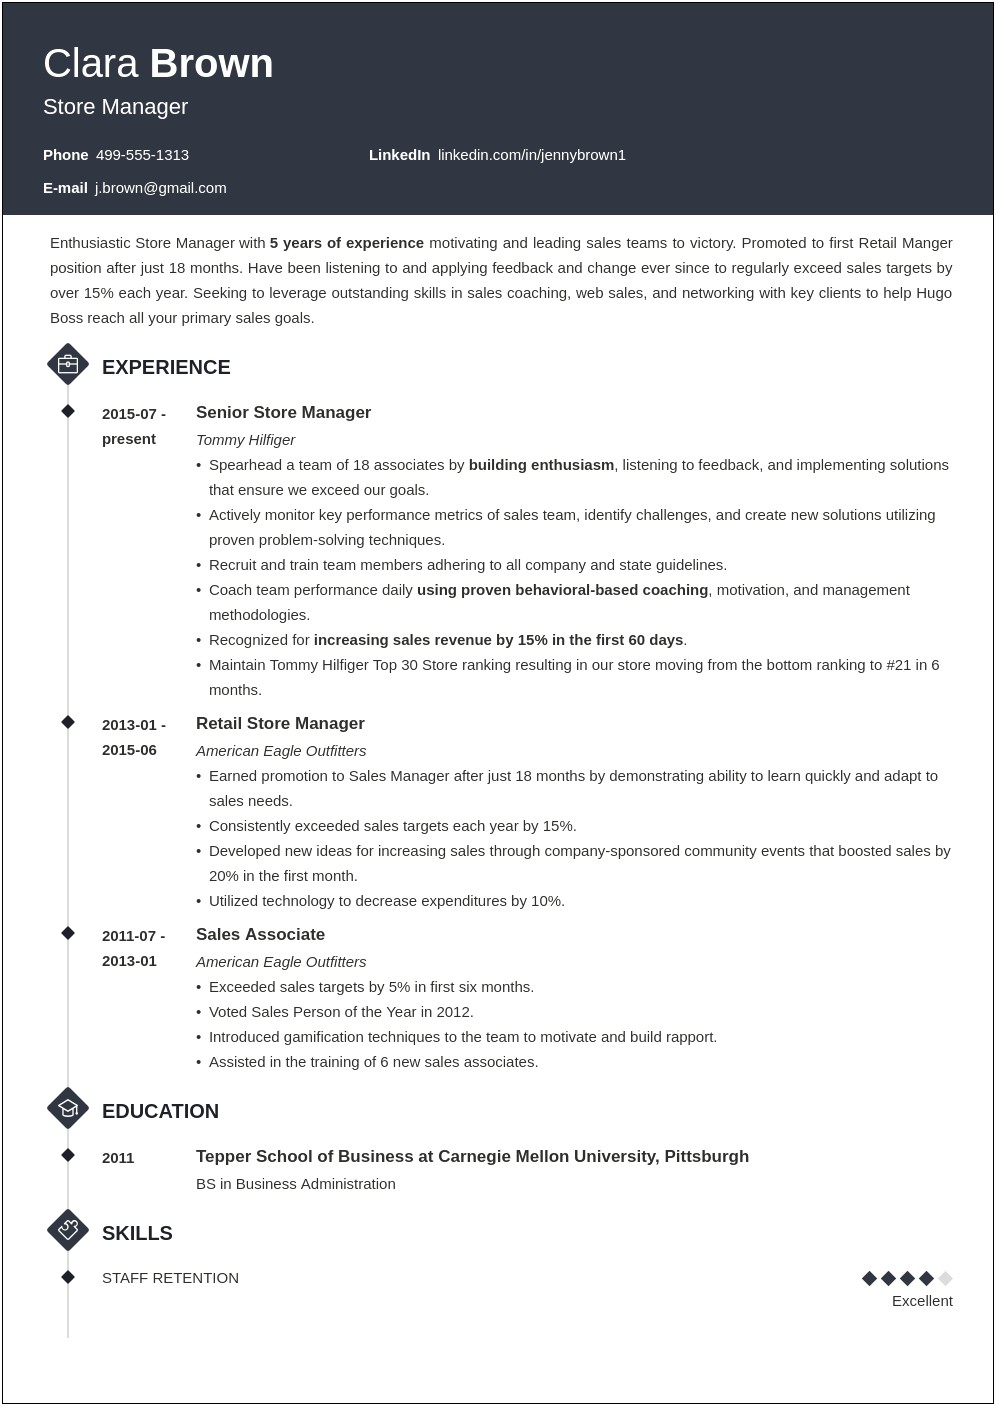 Example Resume For Retail Assistant Manager